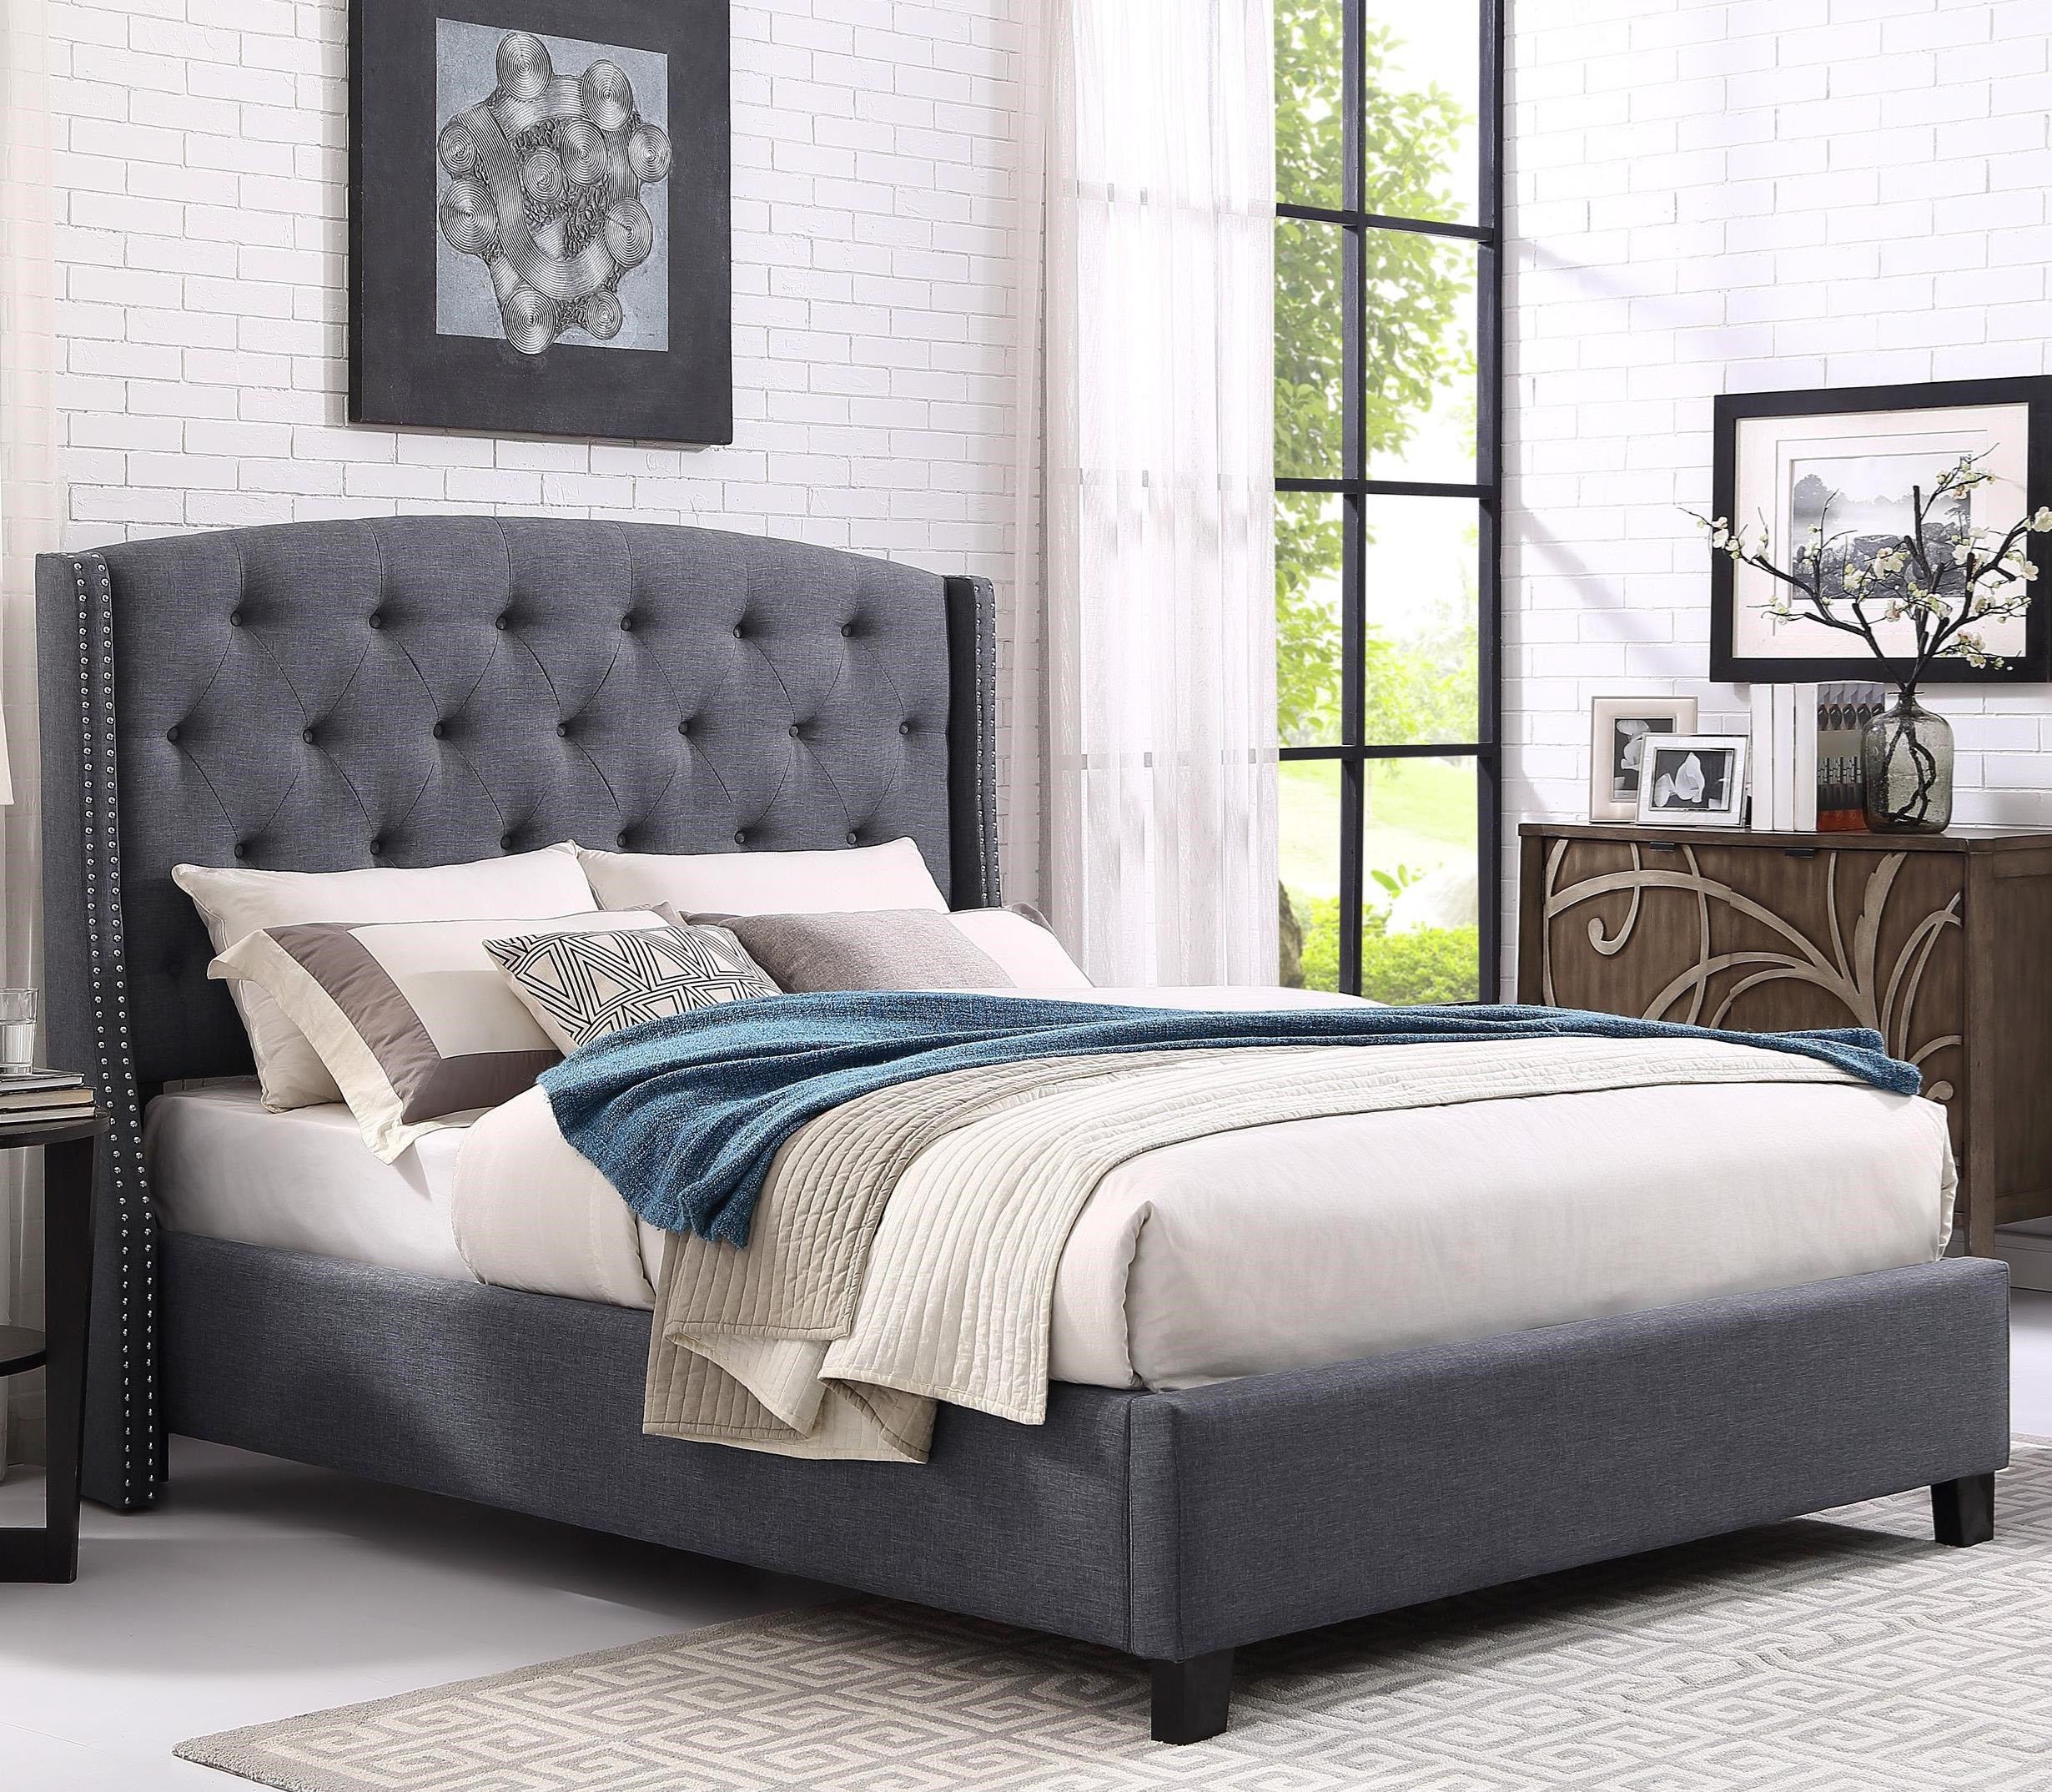 Contemporary Platform Bed Eva 5111 5111GY-EK-Bed in Gray Fabric